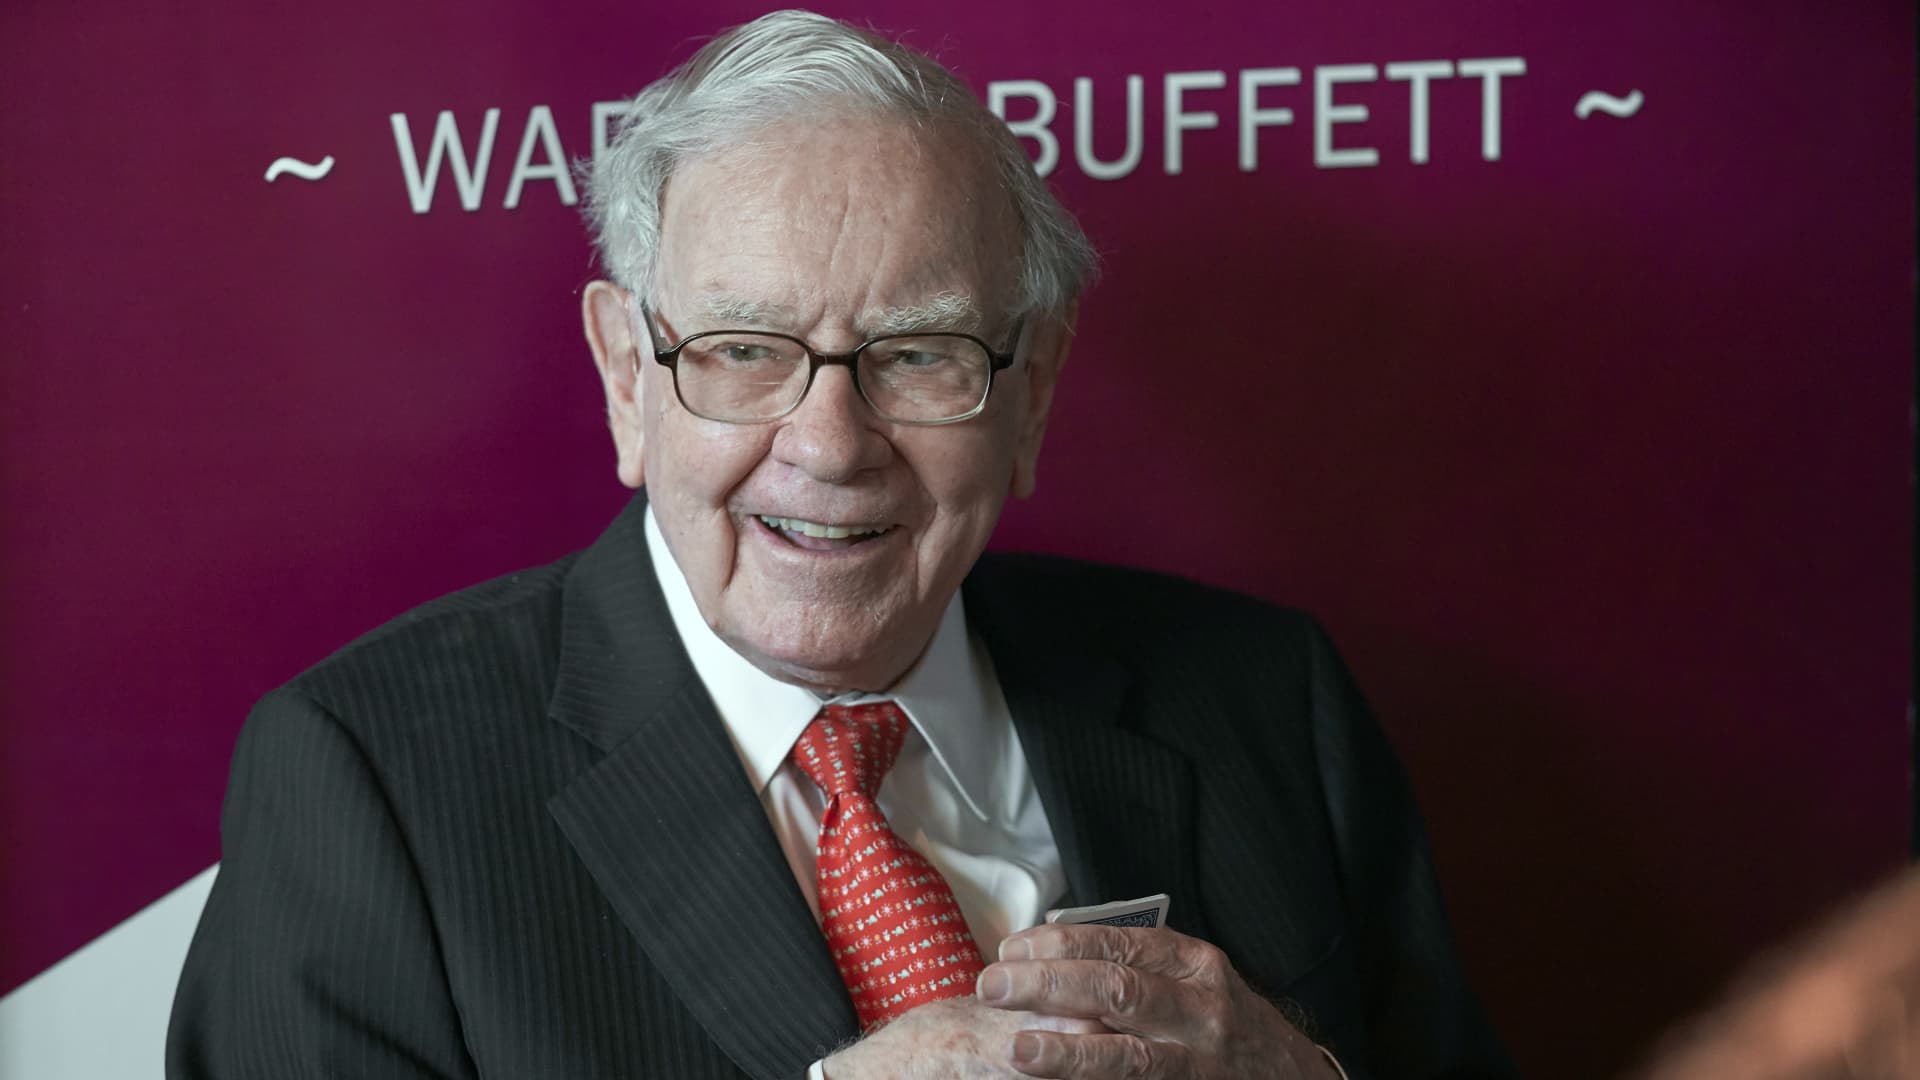 Most of Warren Buffett’s wealth was accumulated after age 65. Here’s what that can teach individual investors